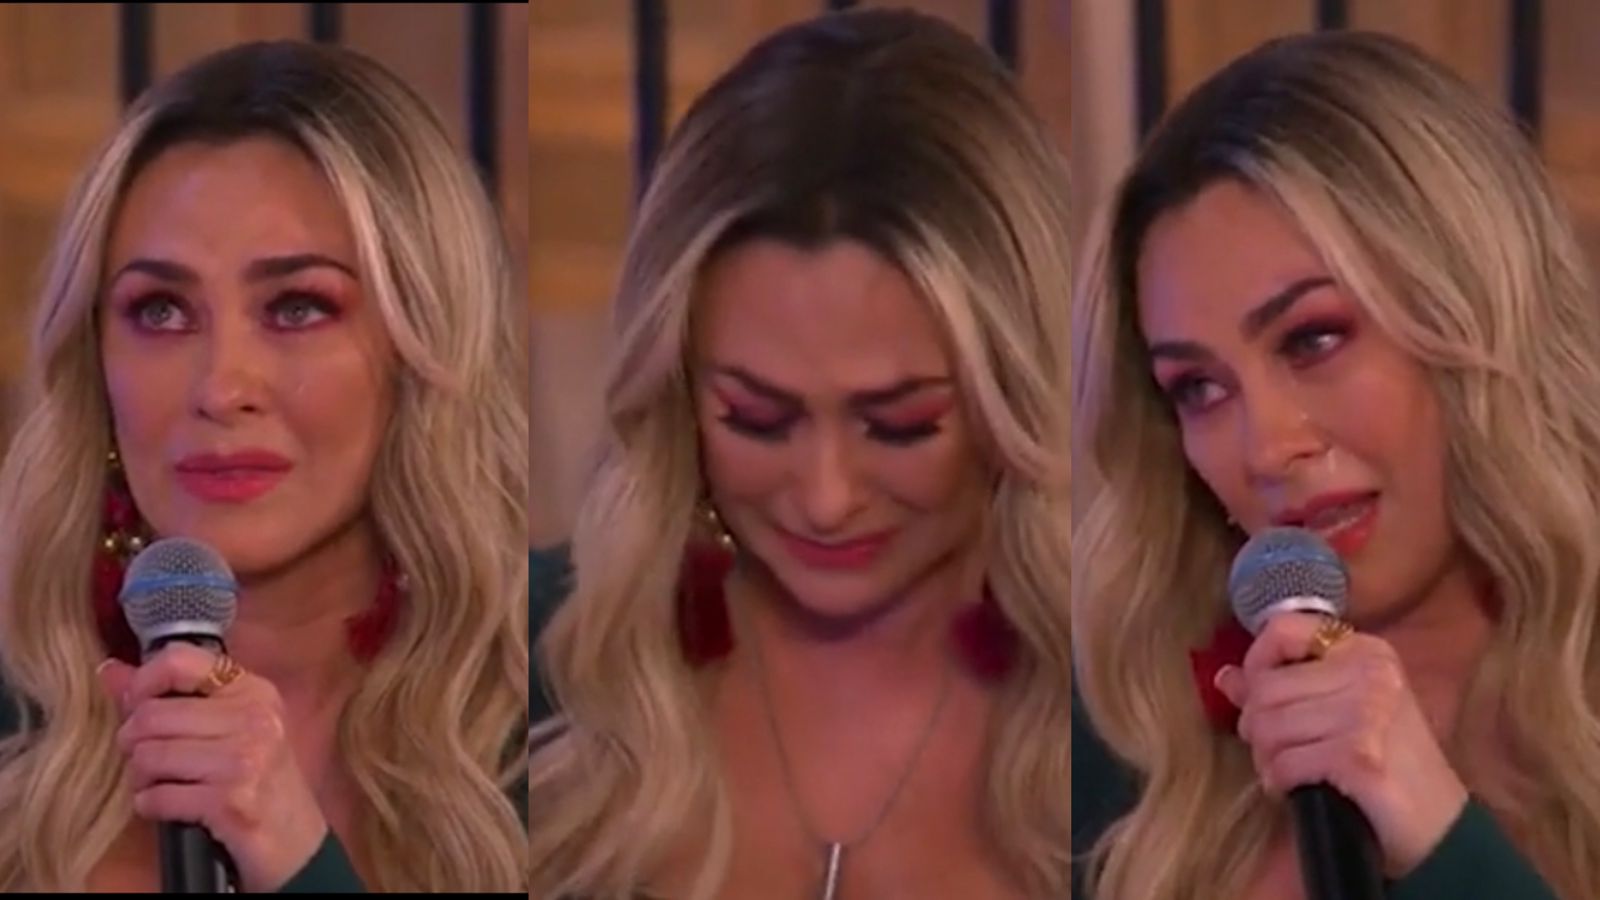 Aracely Arámbula broke down in tears at the presentation of "The stepmother" (Photo: capture Televisa)